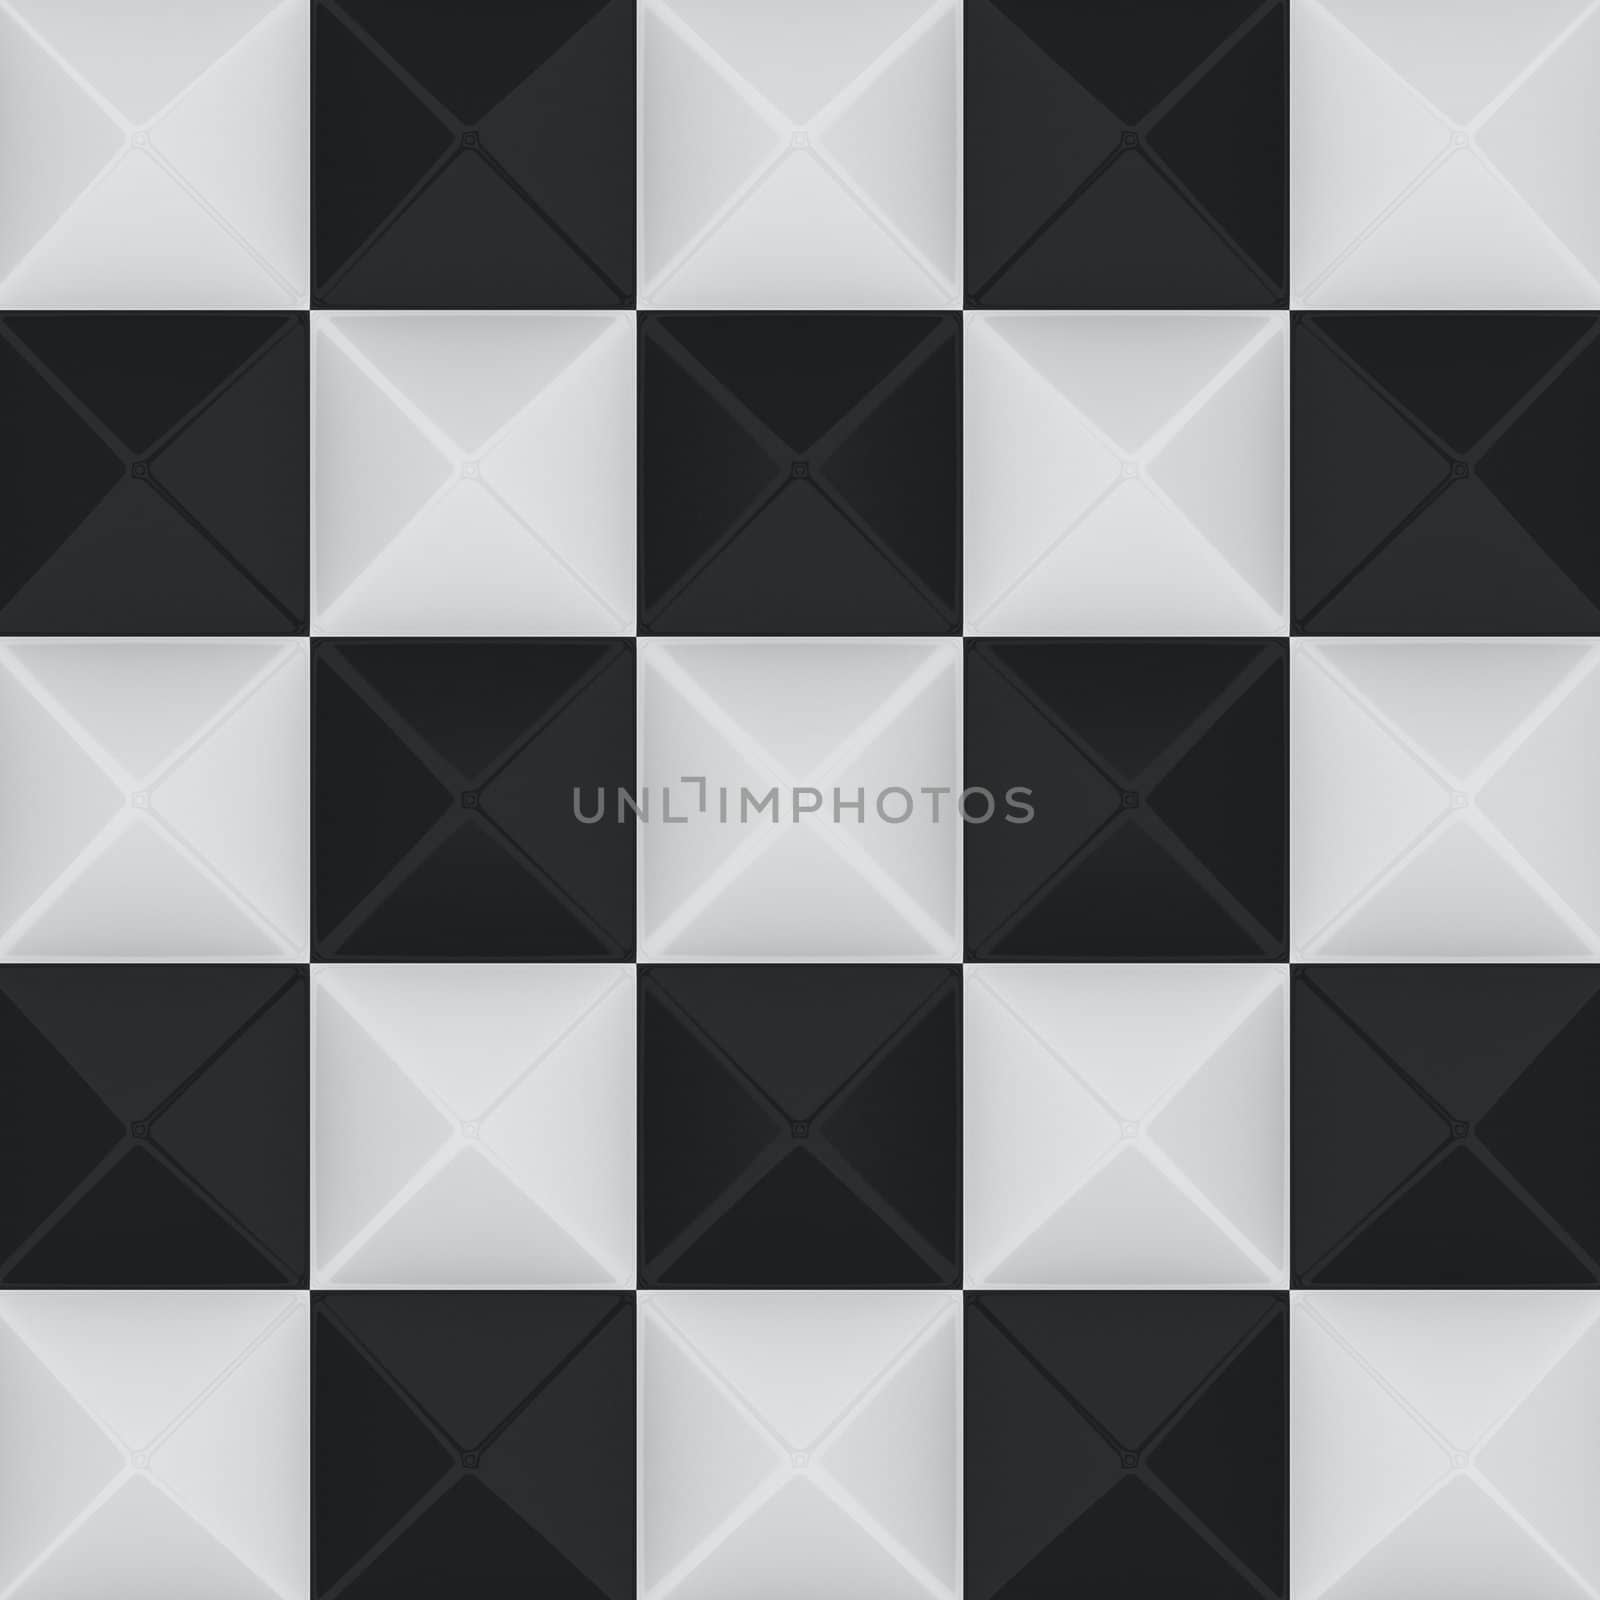 Black and white chess background, sculptured texture